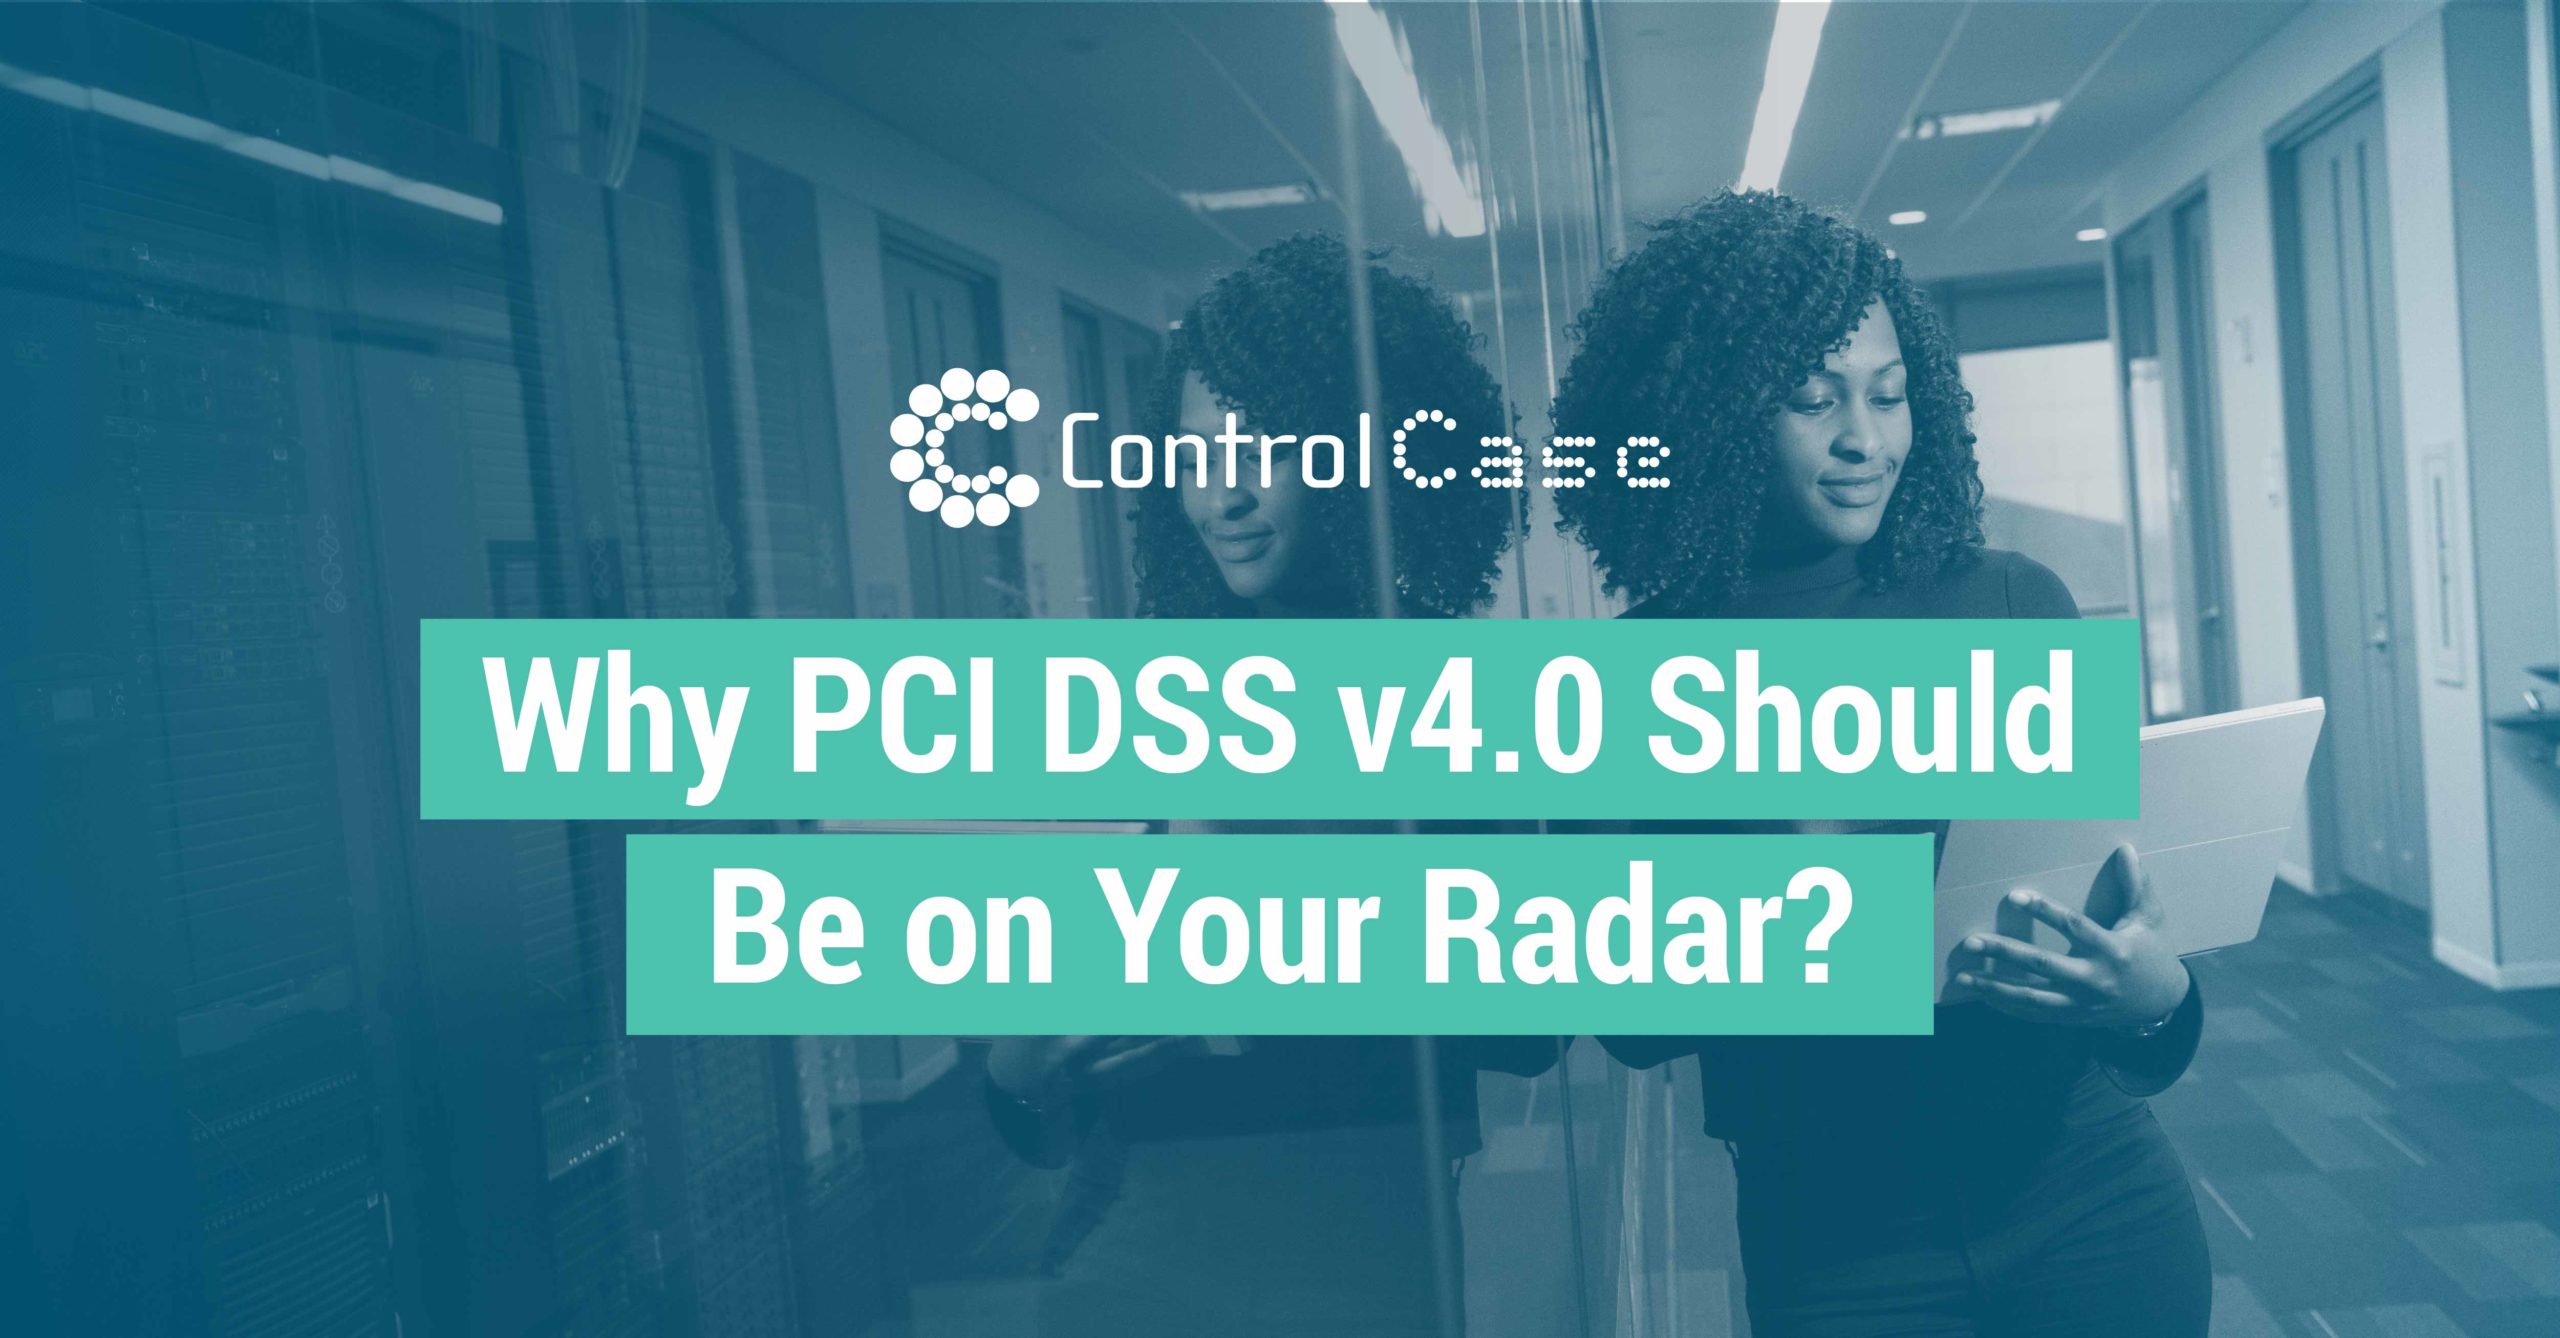 Why PCI DSS 4.0 Should Be on Your Radar